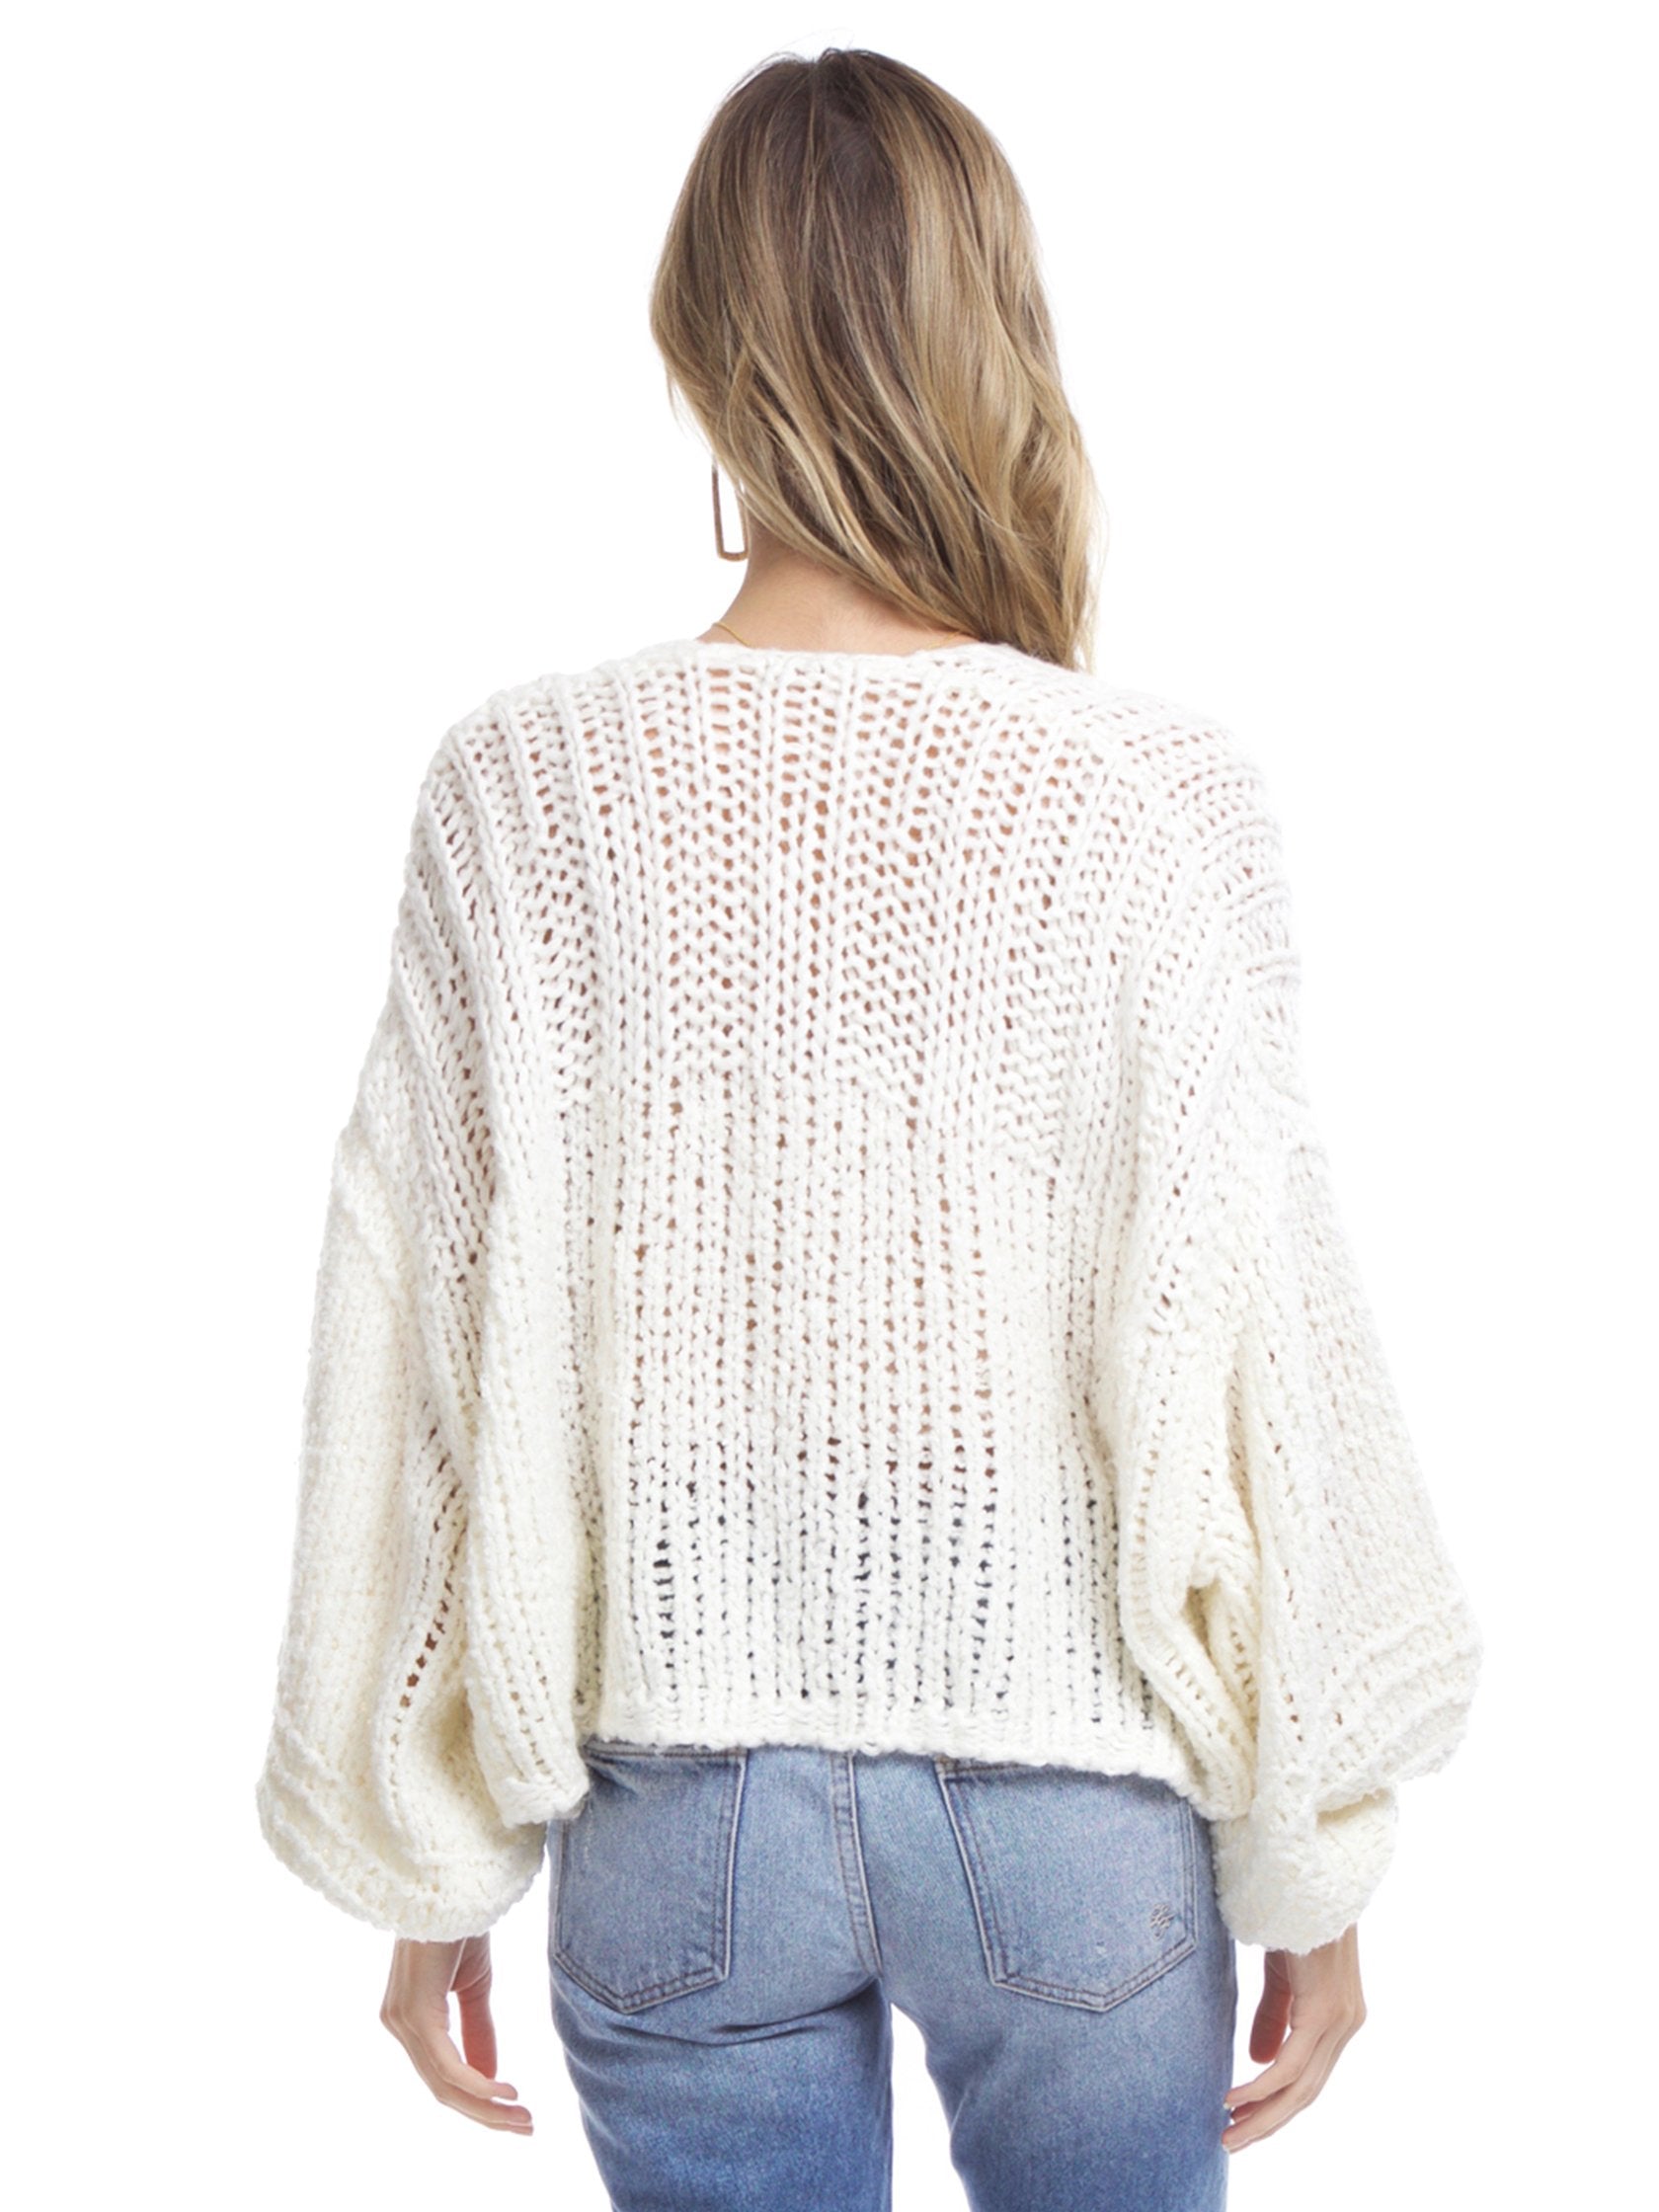 Women outfit in a cardigan rental from Free People called Chamomile Cardi